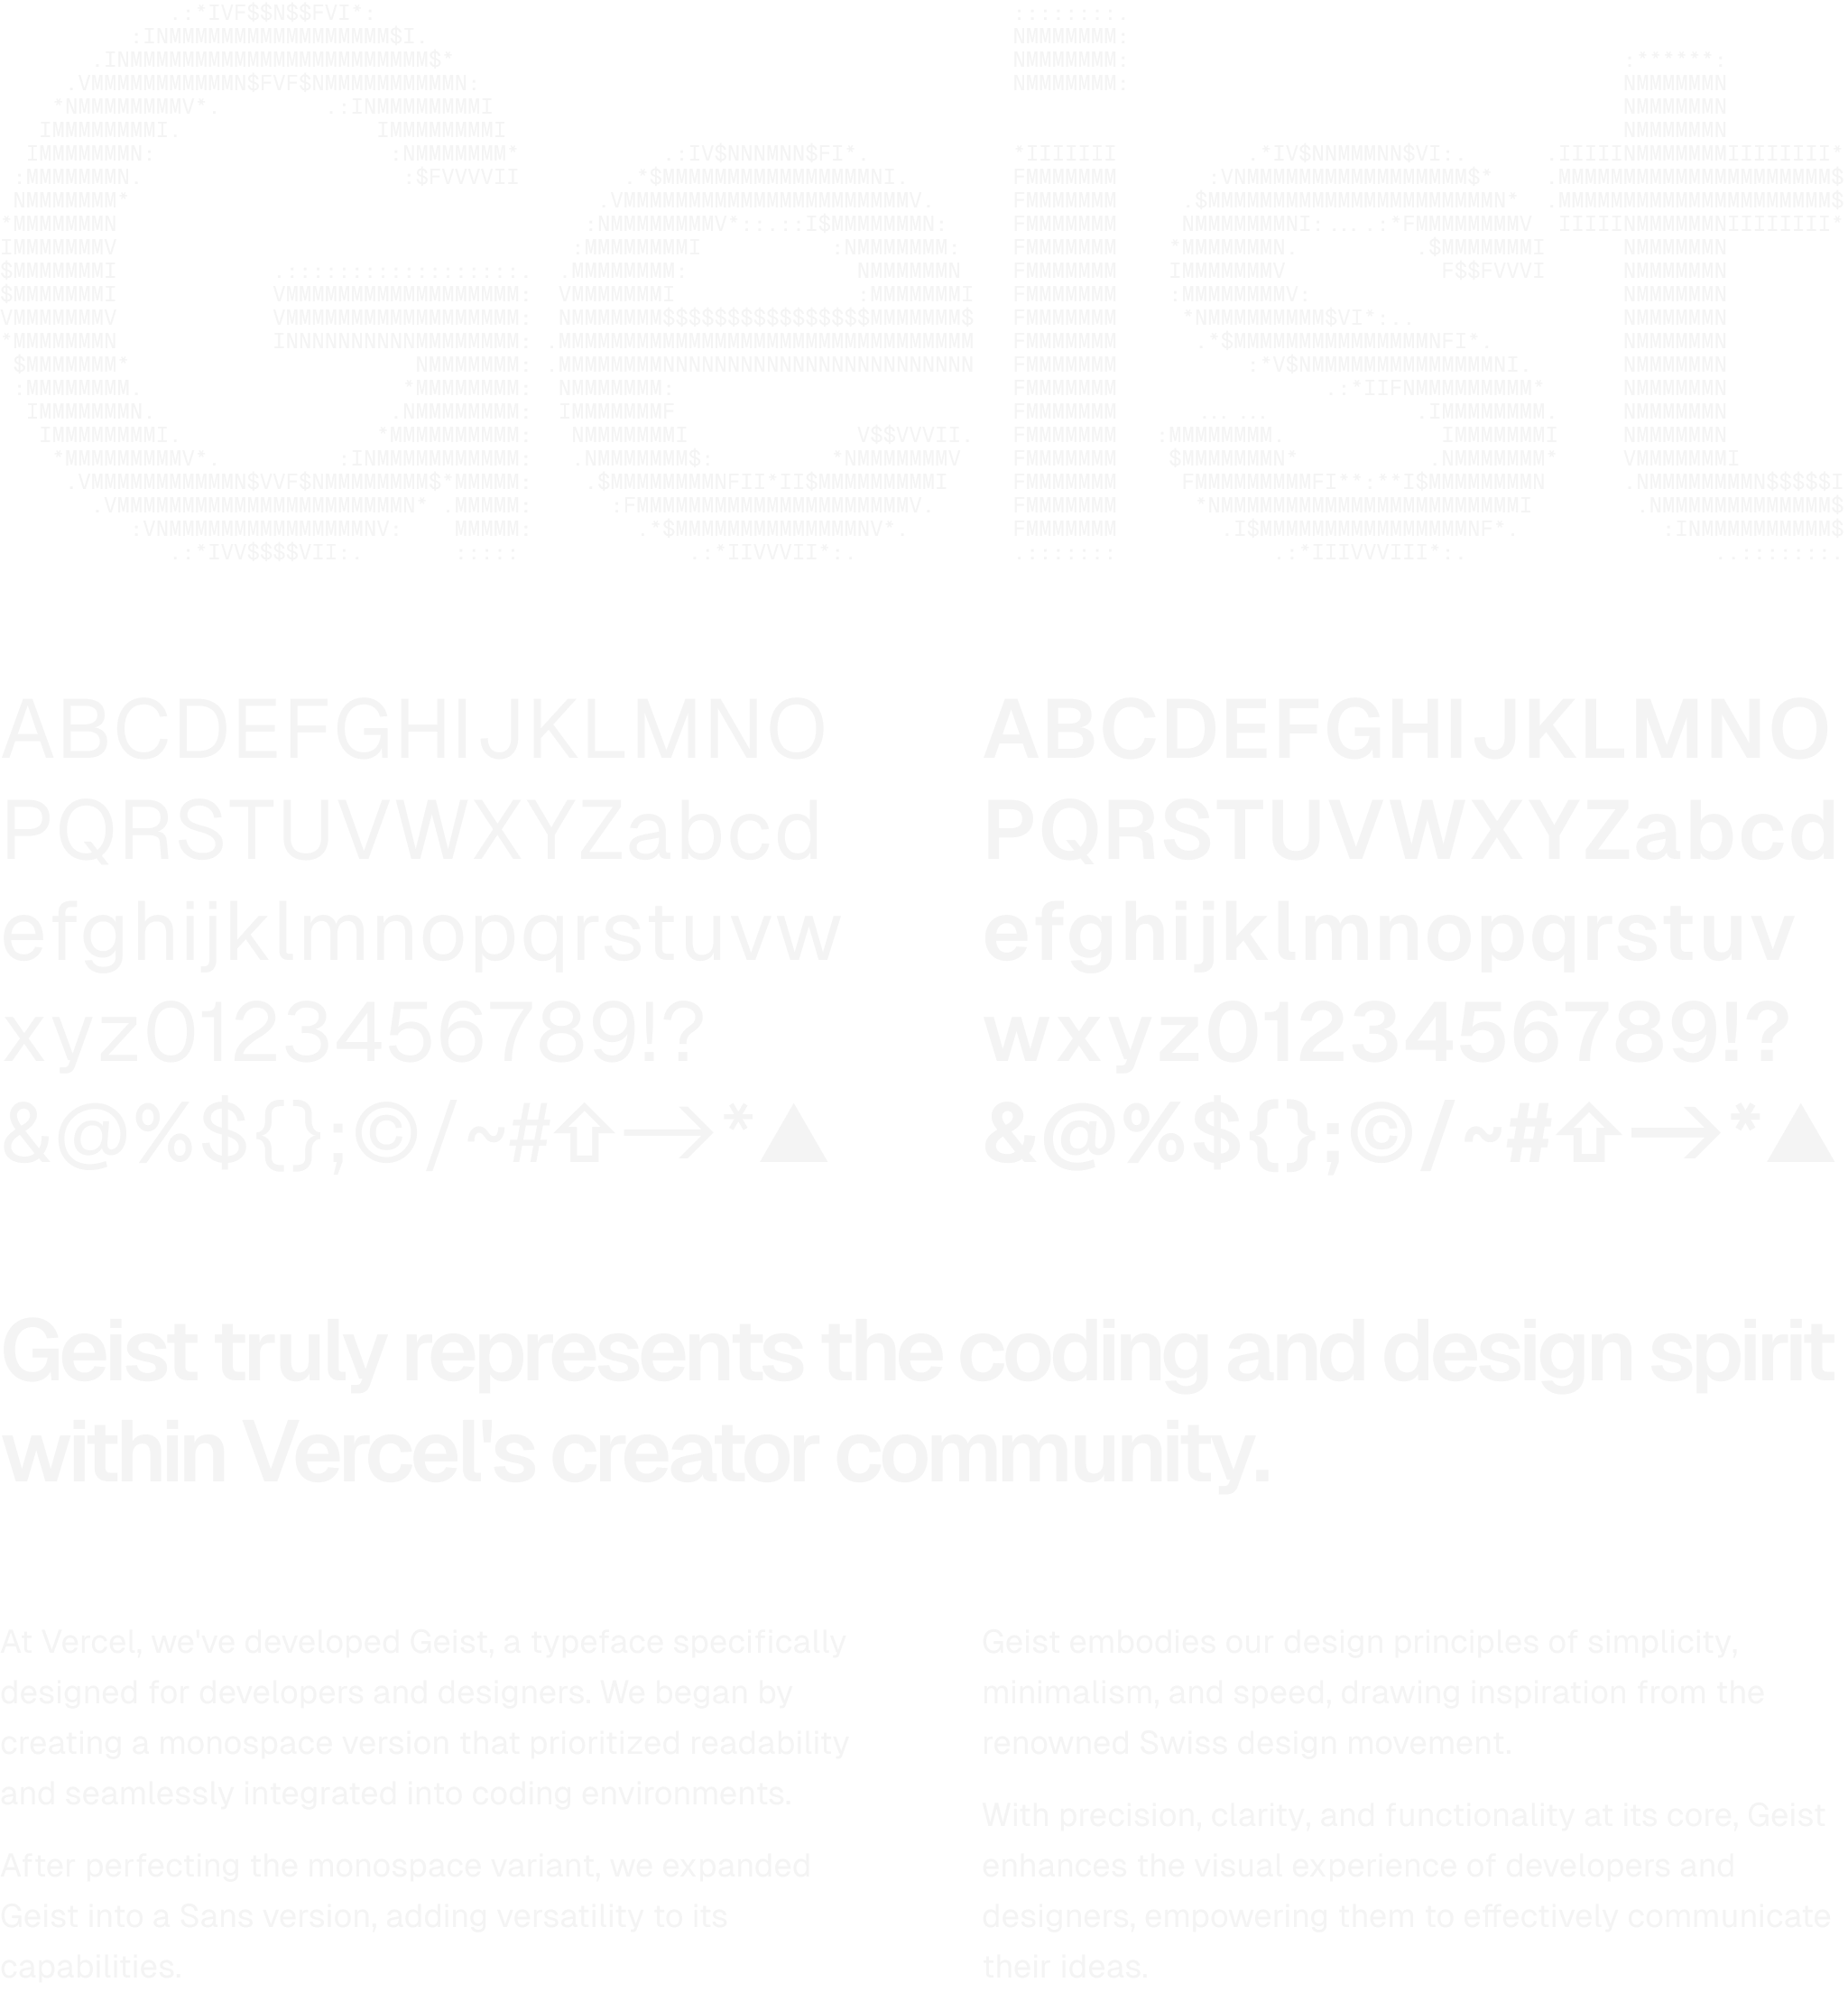 The words “Geist” written as ASCII art in Geist Mono resembling Geist Sans. After this is a demonstration of Geist Sans in regular and bold face that shows alphanumeric characters and some symbols, notably a symbol for Shift, a right arrow, and the Vercel logo. Below is some text written in Geist - a heading: “Geist truly represents the coding and design spirit within Vercel's creator community.”, one paragraph: “At Vercel, we've developed Geist, a typeface specifically designed for developers and designers. We began by creating a monospace version that prioritized readability and seamlessly integrated into coding environments. After perfecting the monospace variant, we expanded Geist into a Sans version, adding versatility to its capabilities.”, and another next to it: “Geist embodies our design principles of simplicity, minimalism, and speed, drawing inspiration from the renowned Swiss design movement. With precision, clarity, and functionality at its core, Geist enhances the visual experience of developers and designers, empowering them to effectively communicate their ideas.”